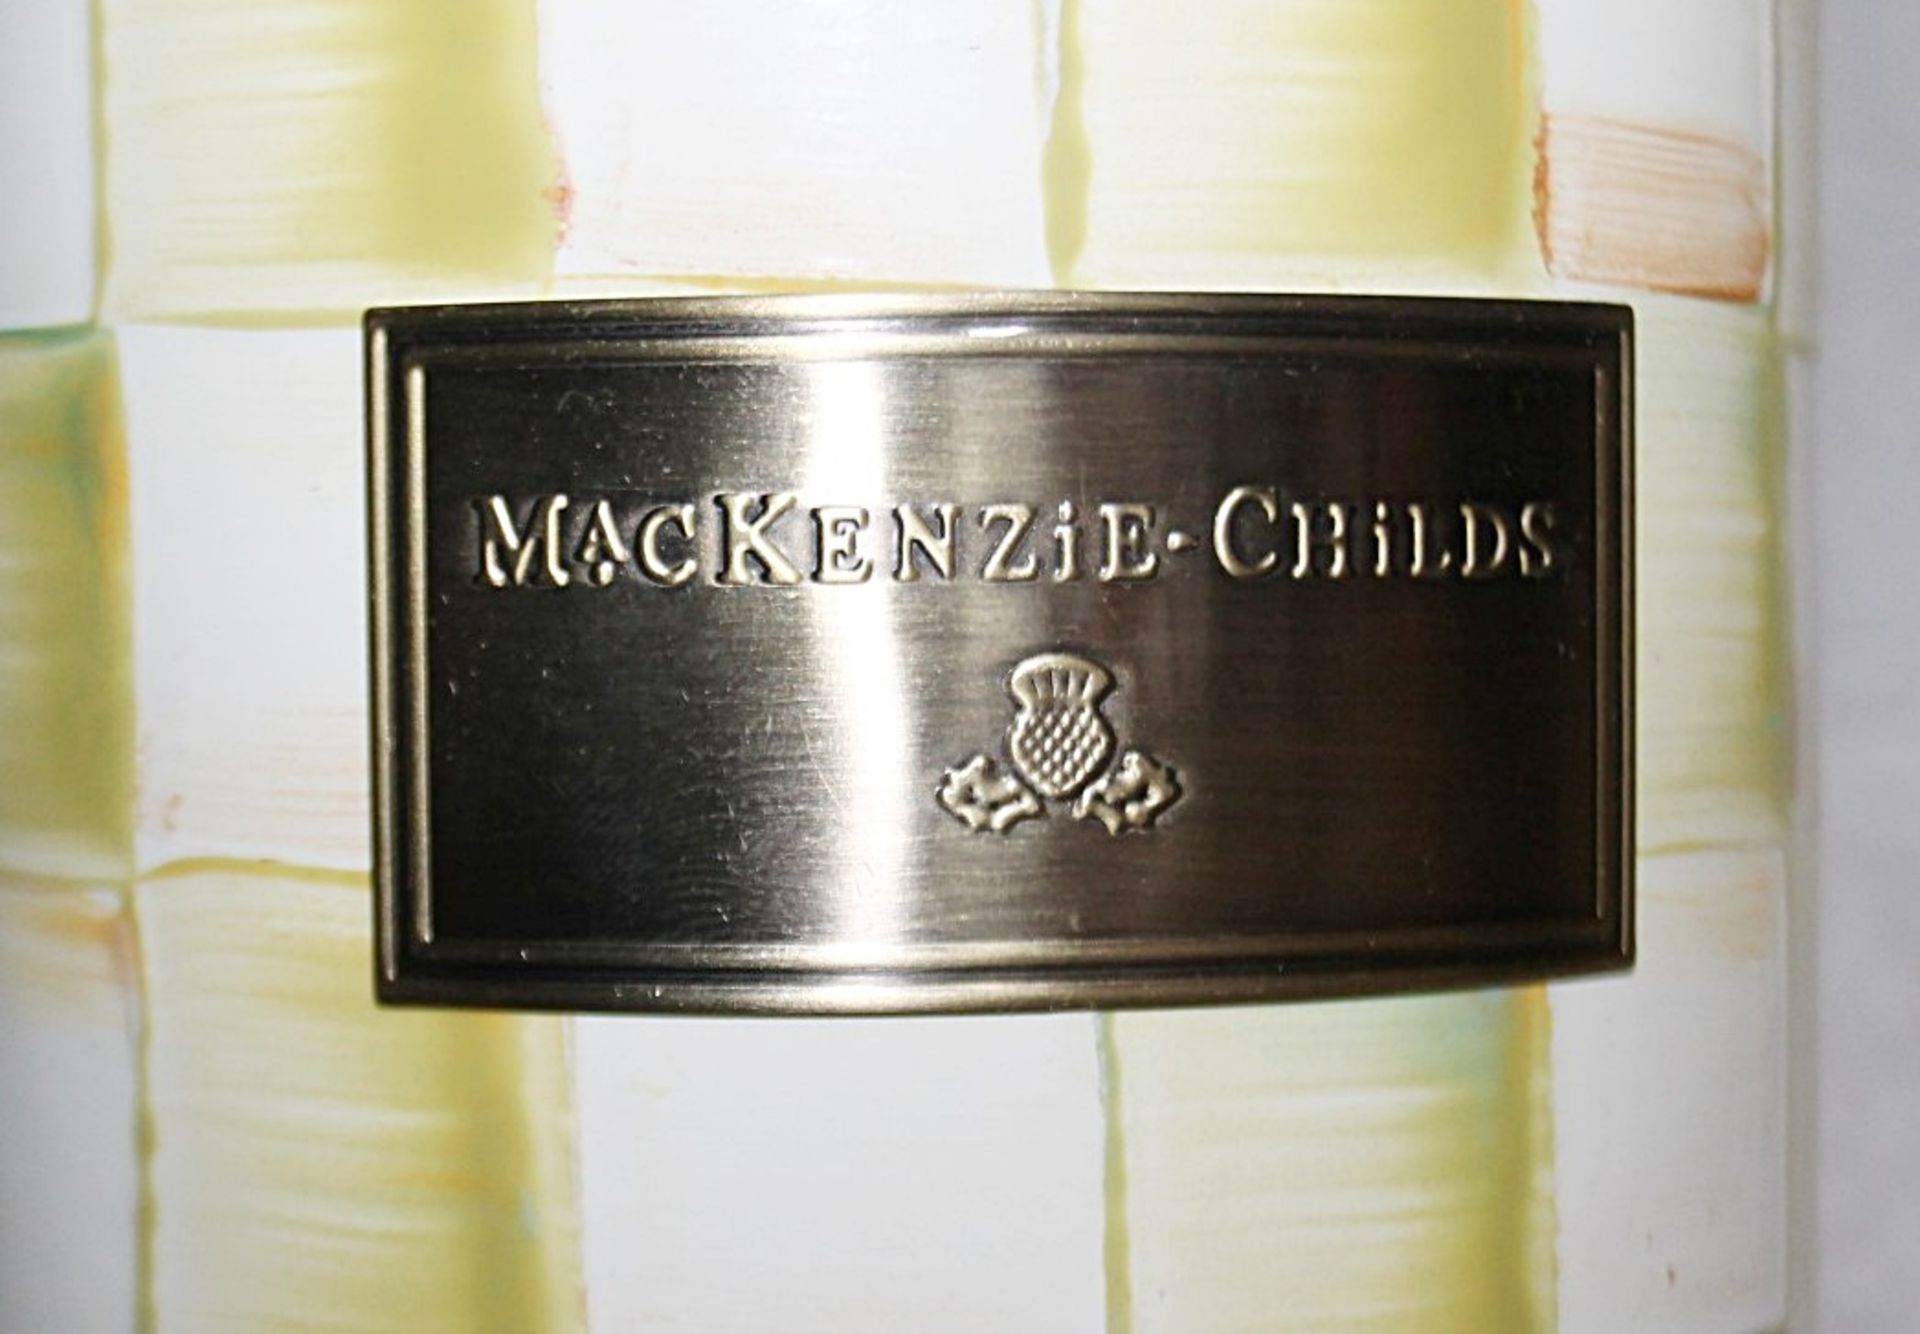 1 x MACKENZIE-CHILDS Small Parchment Check Enamel Canister - Original Price £97.00 - Ref: HAR280/ - Image 6 of 9